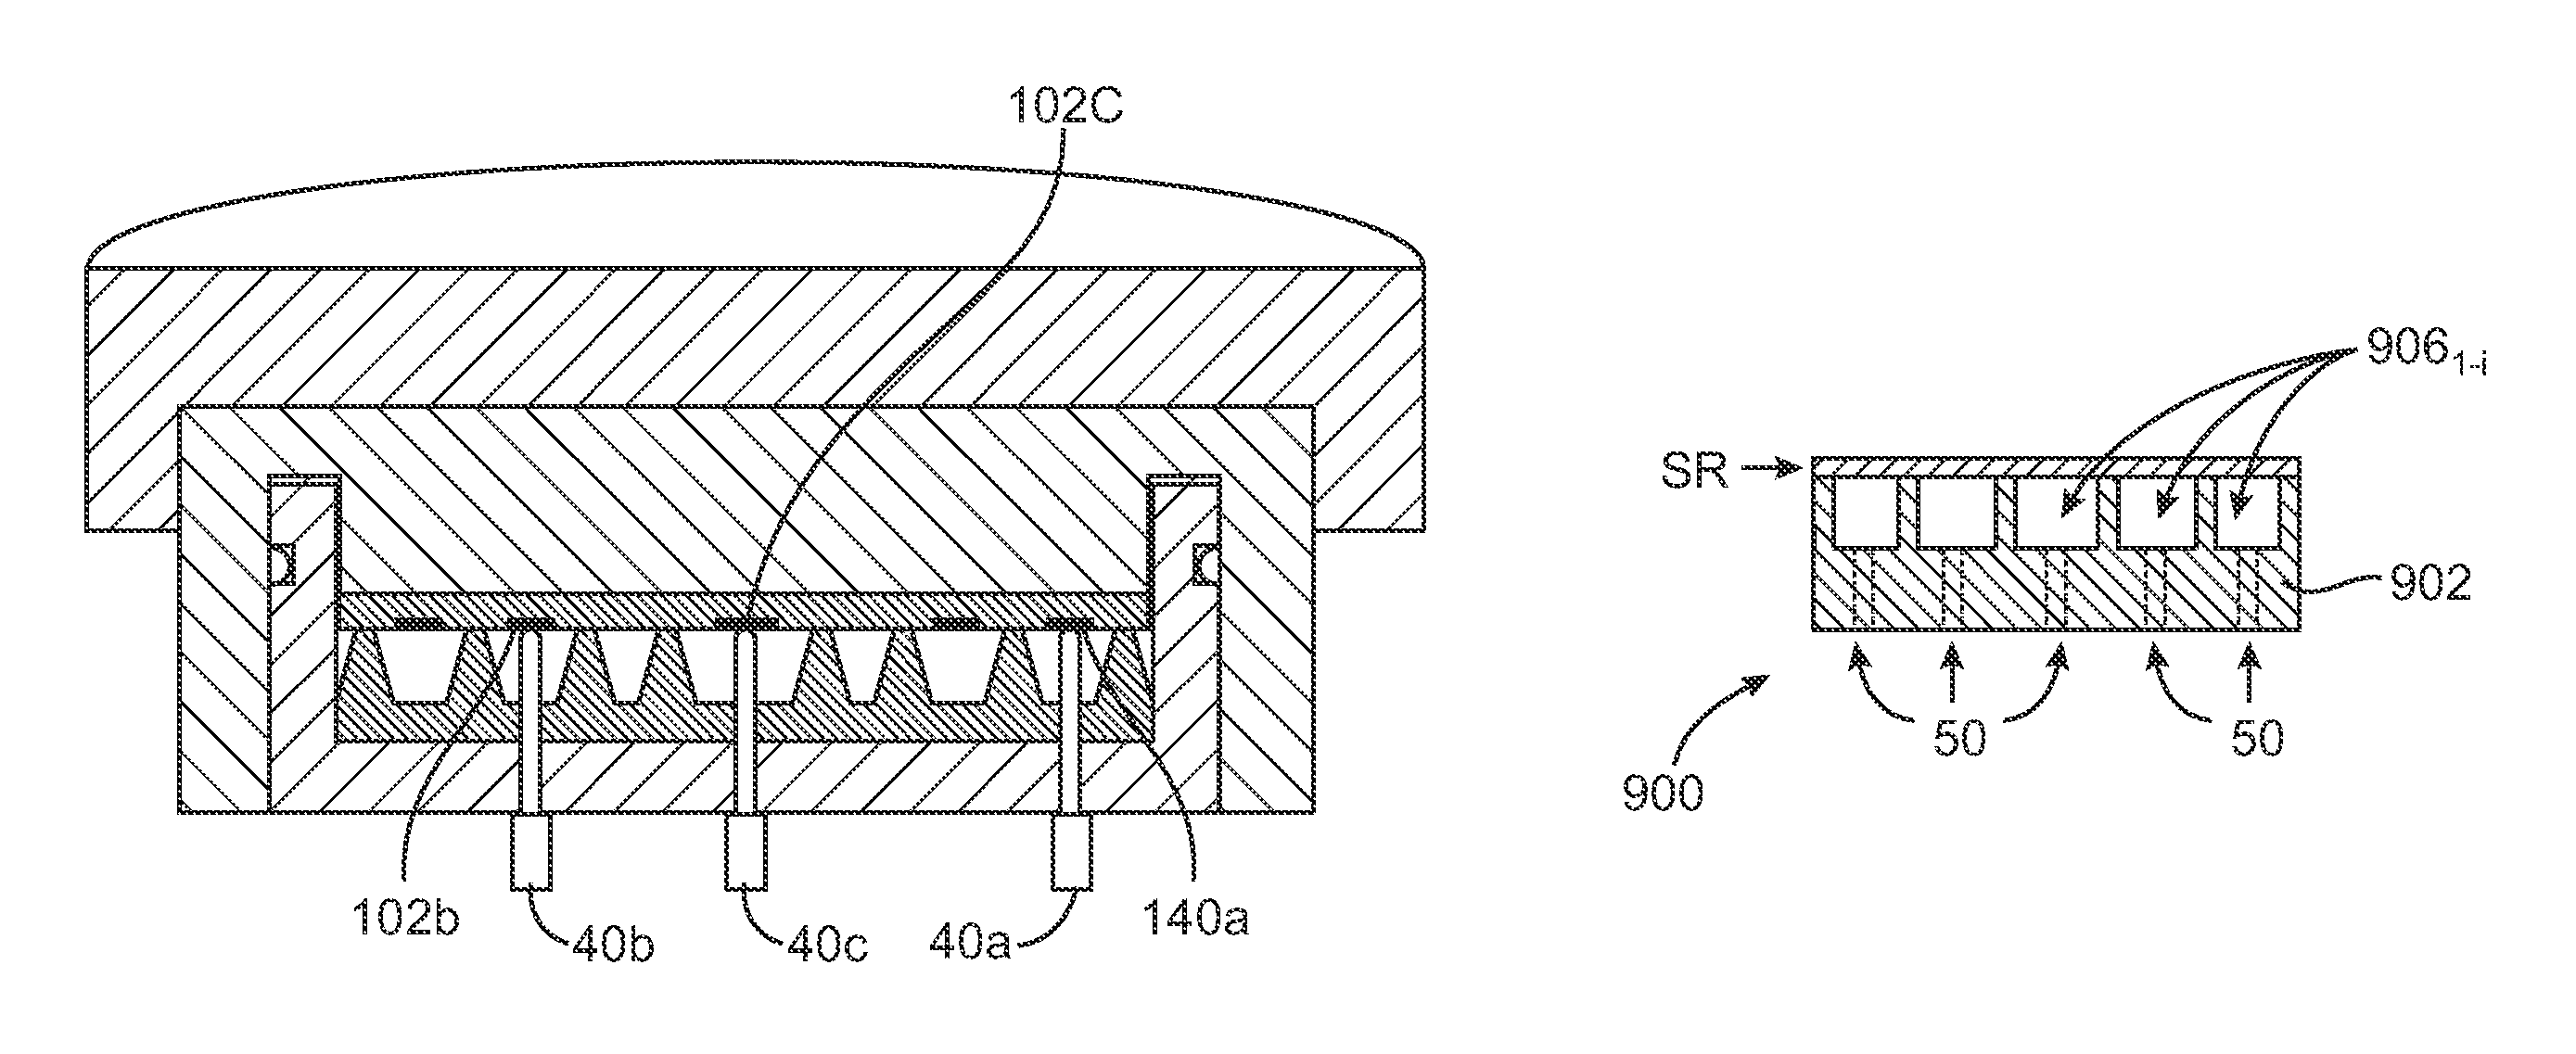 Slip ring spacer and method for its use